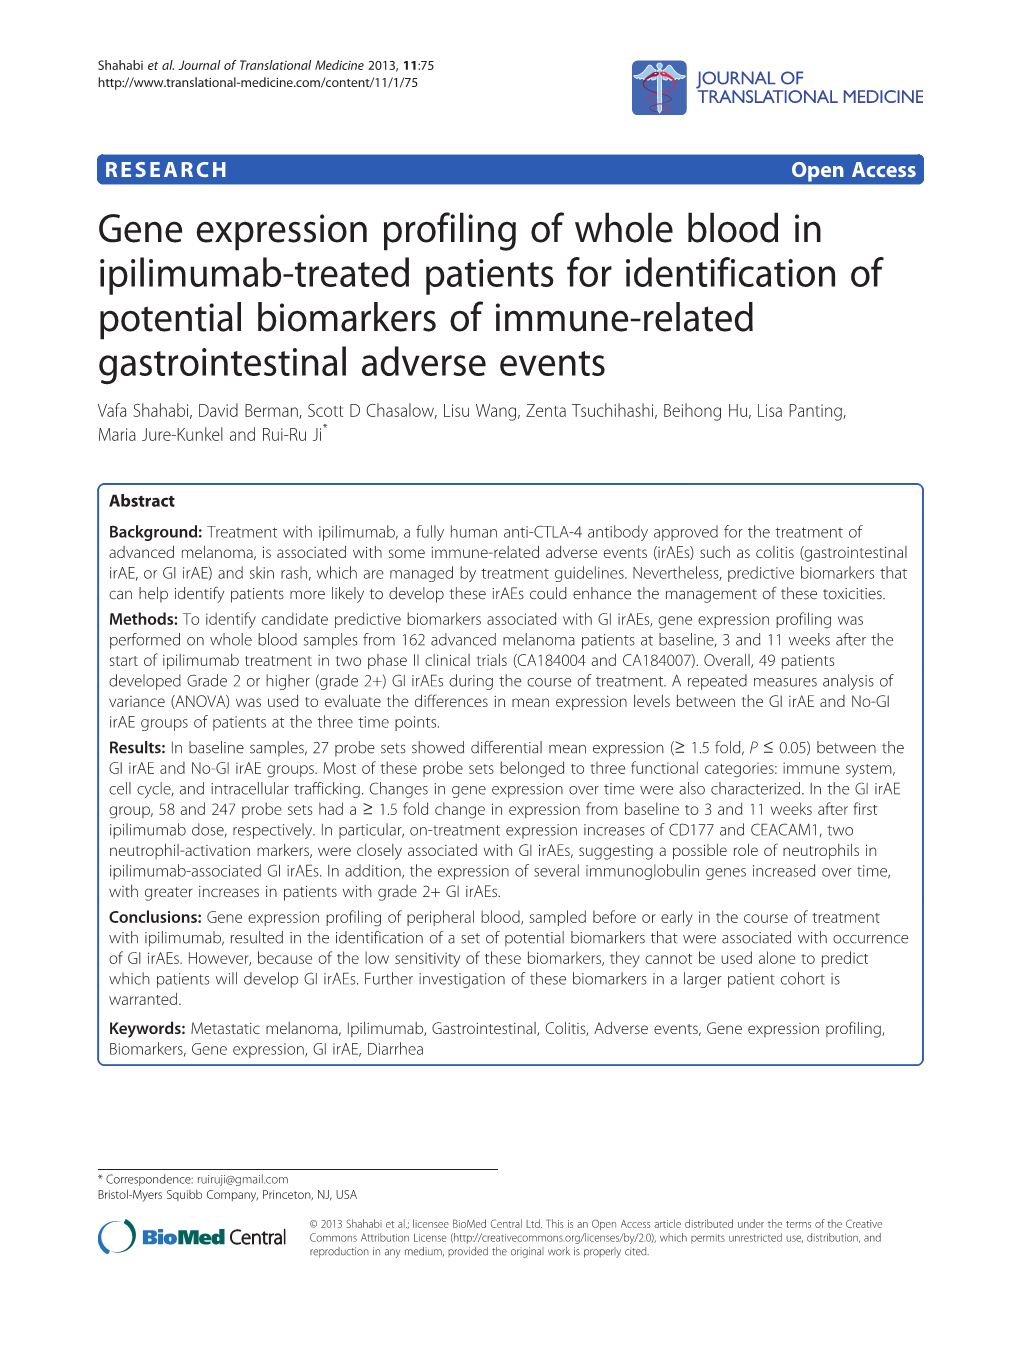 Gene Expression Profiling of Whole Blood in Ipilimumab-Treated Patients